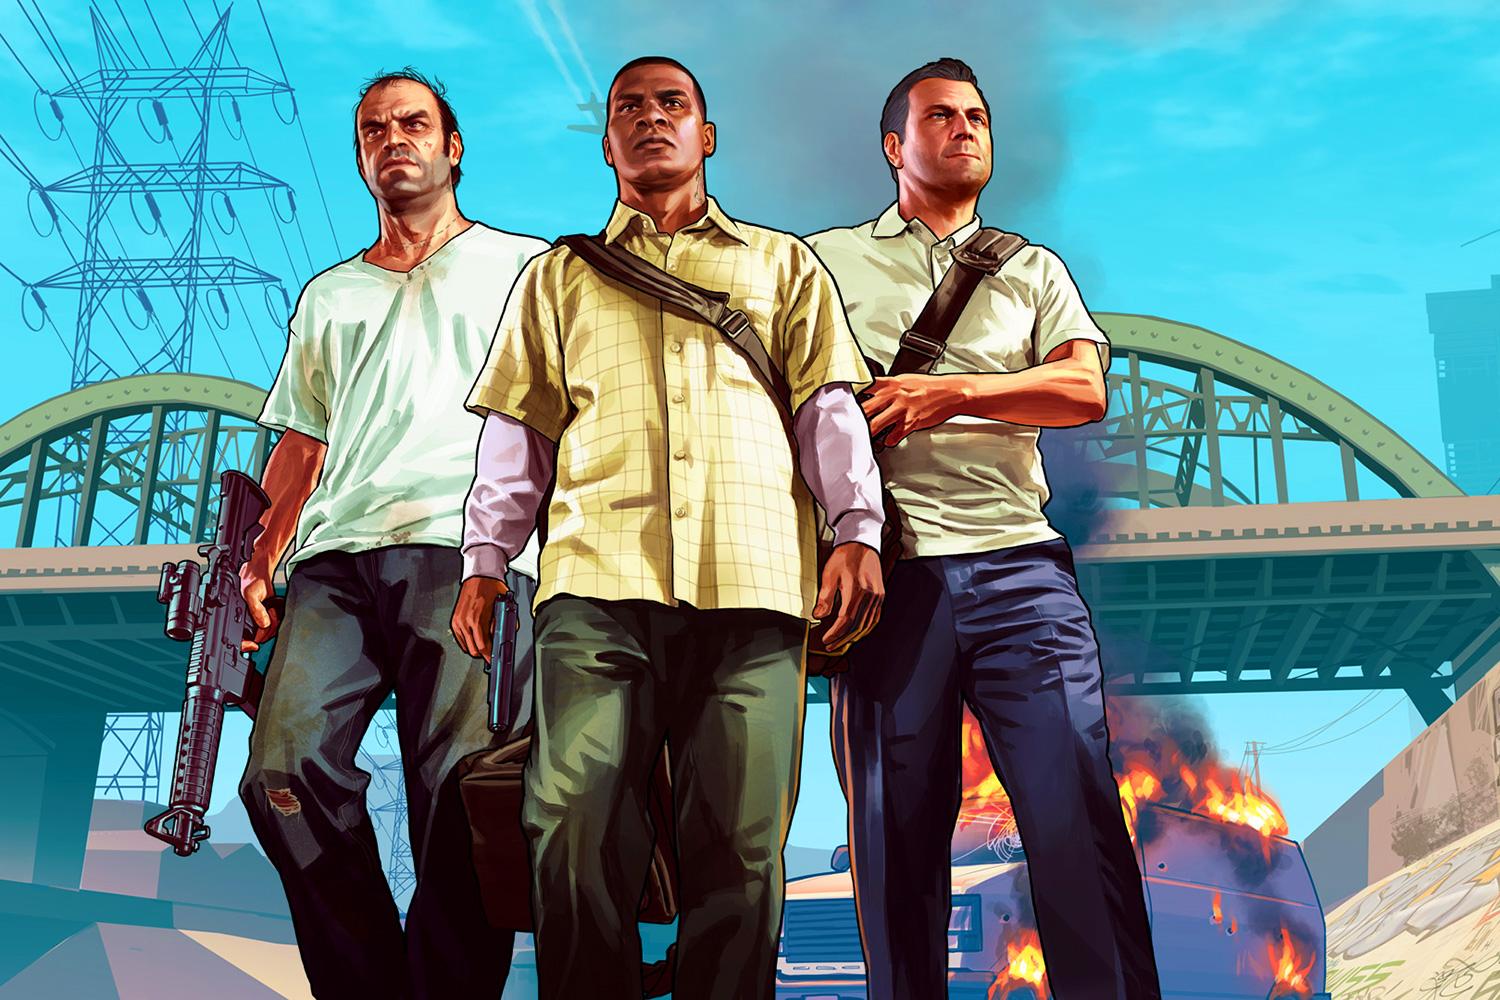 Grand Theft Auto: San Andreas/Regional Differences - The Cutting Room Floor